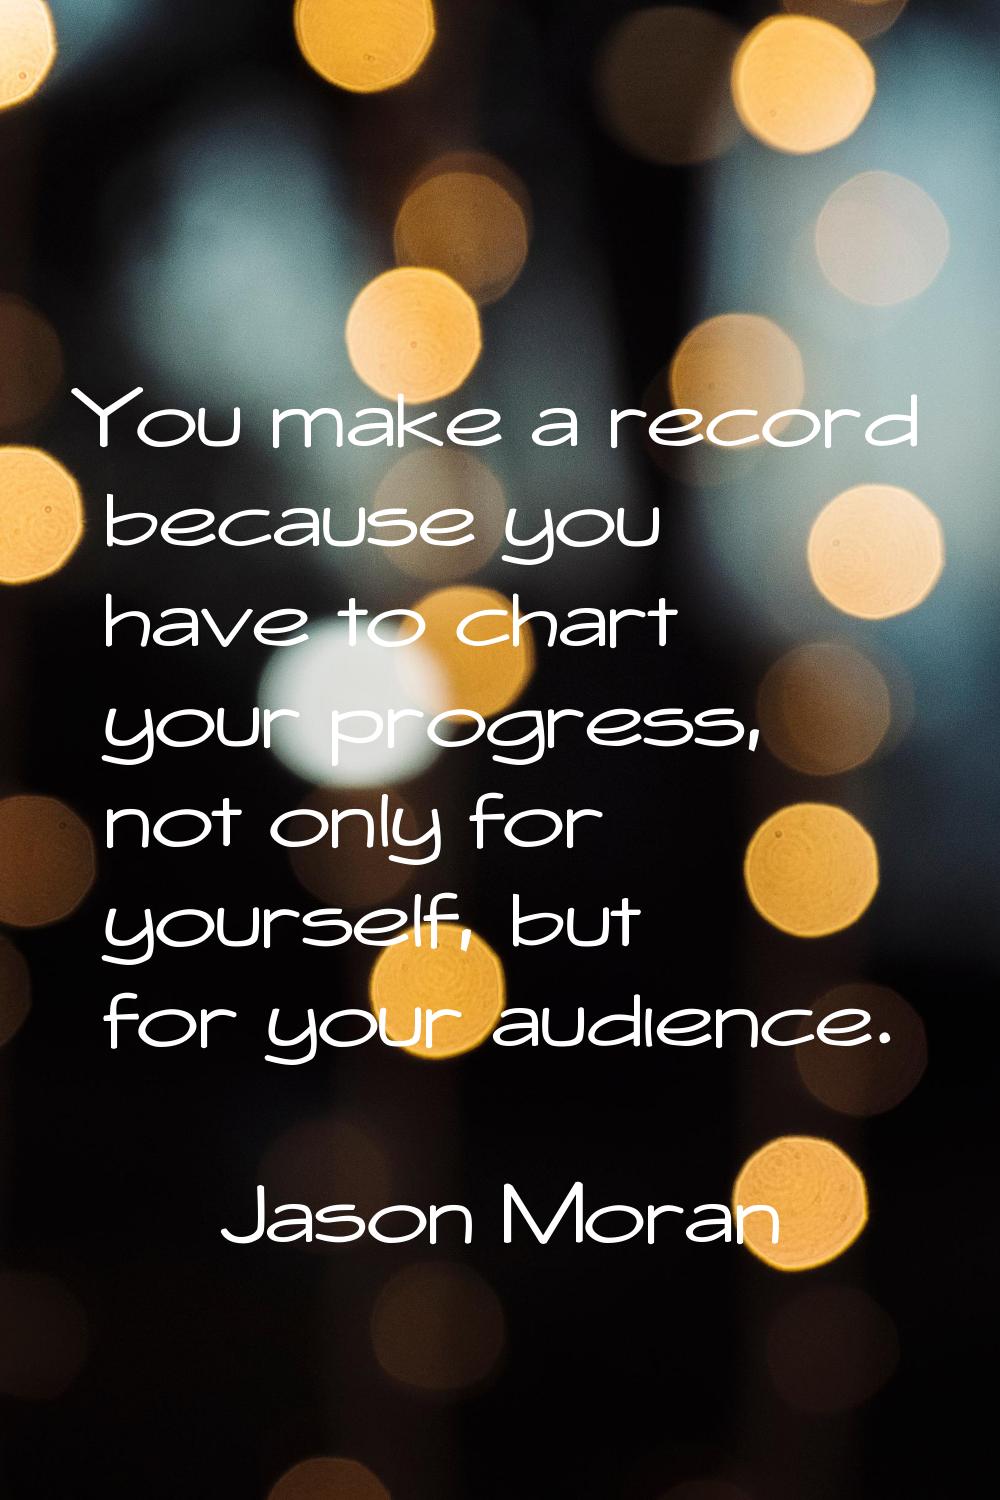 You make a record because you have to chart your progress, not only for yourself, but for your audi